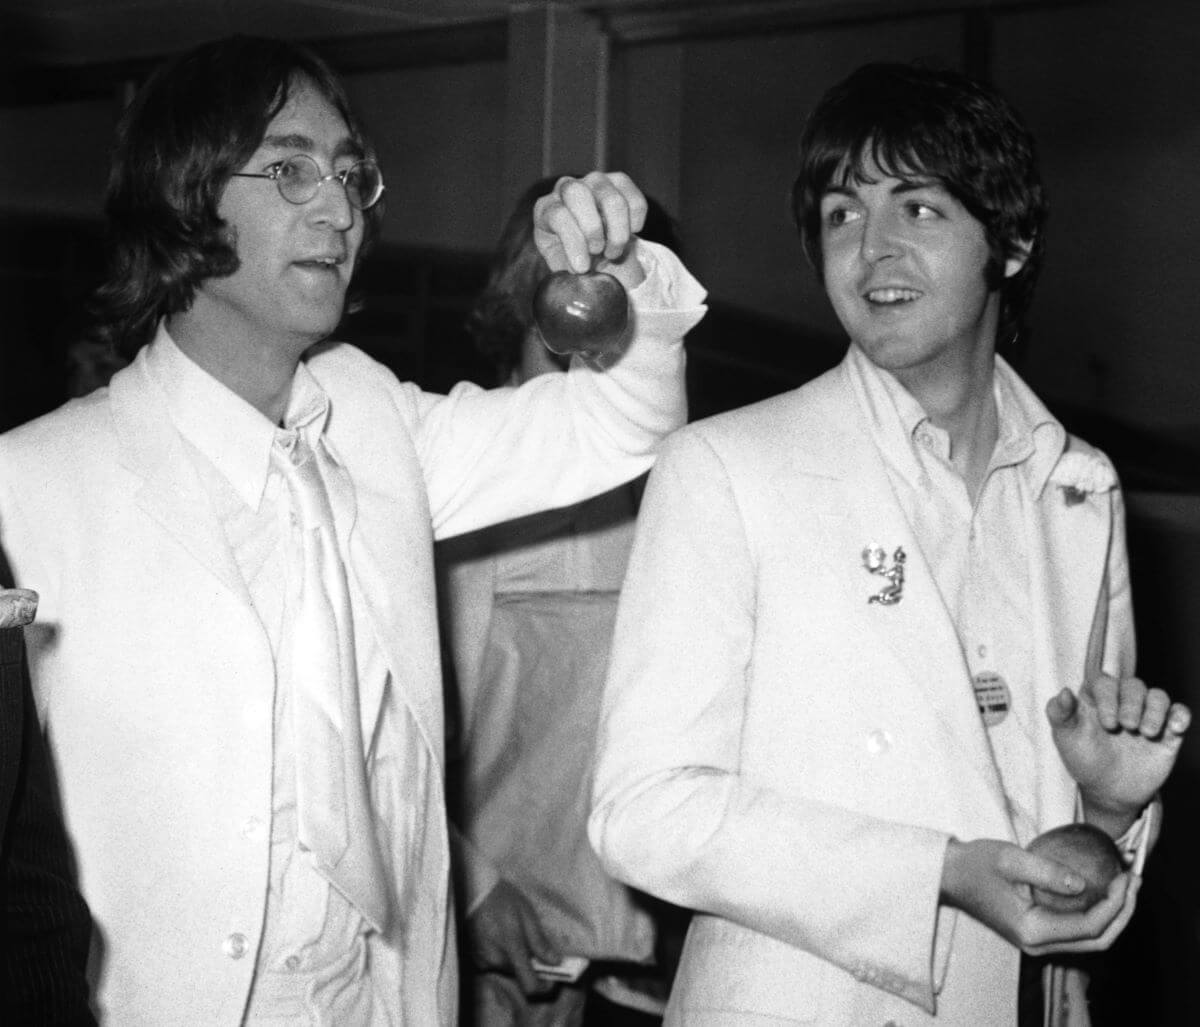 A black and white picture of John Lennon and Paul McCartney wearing white suits and holding apples.